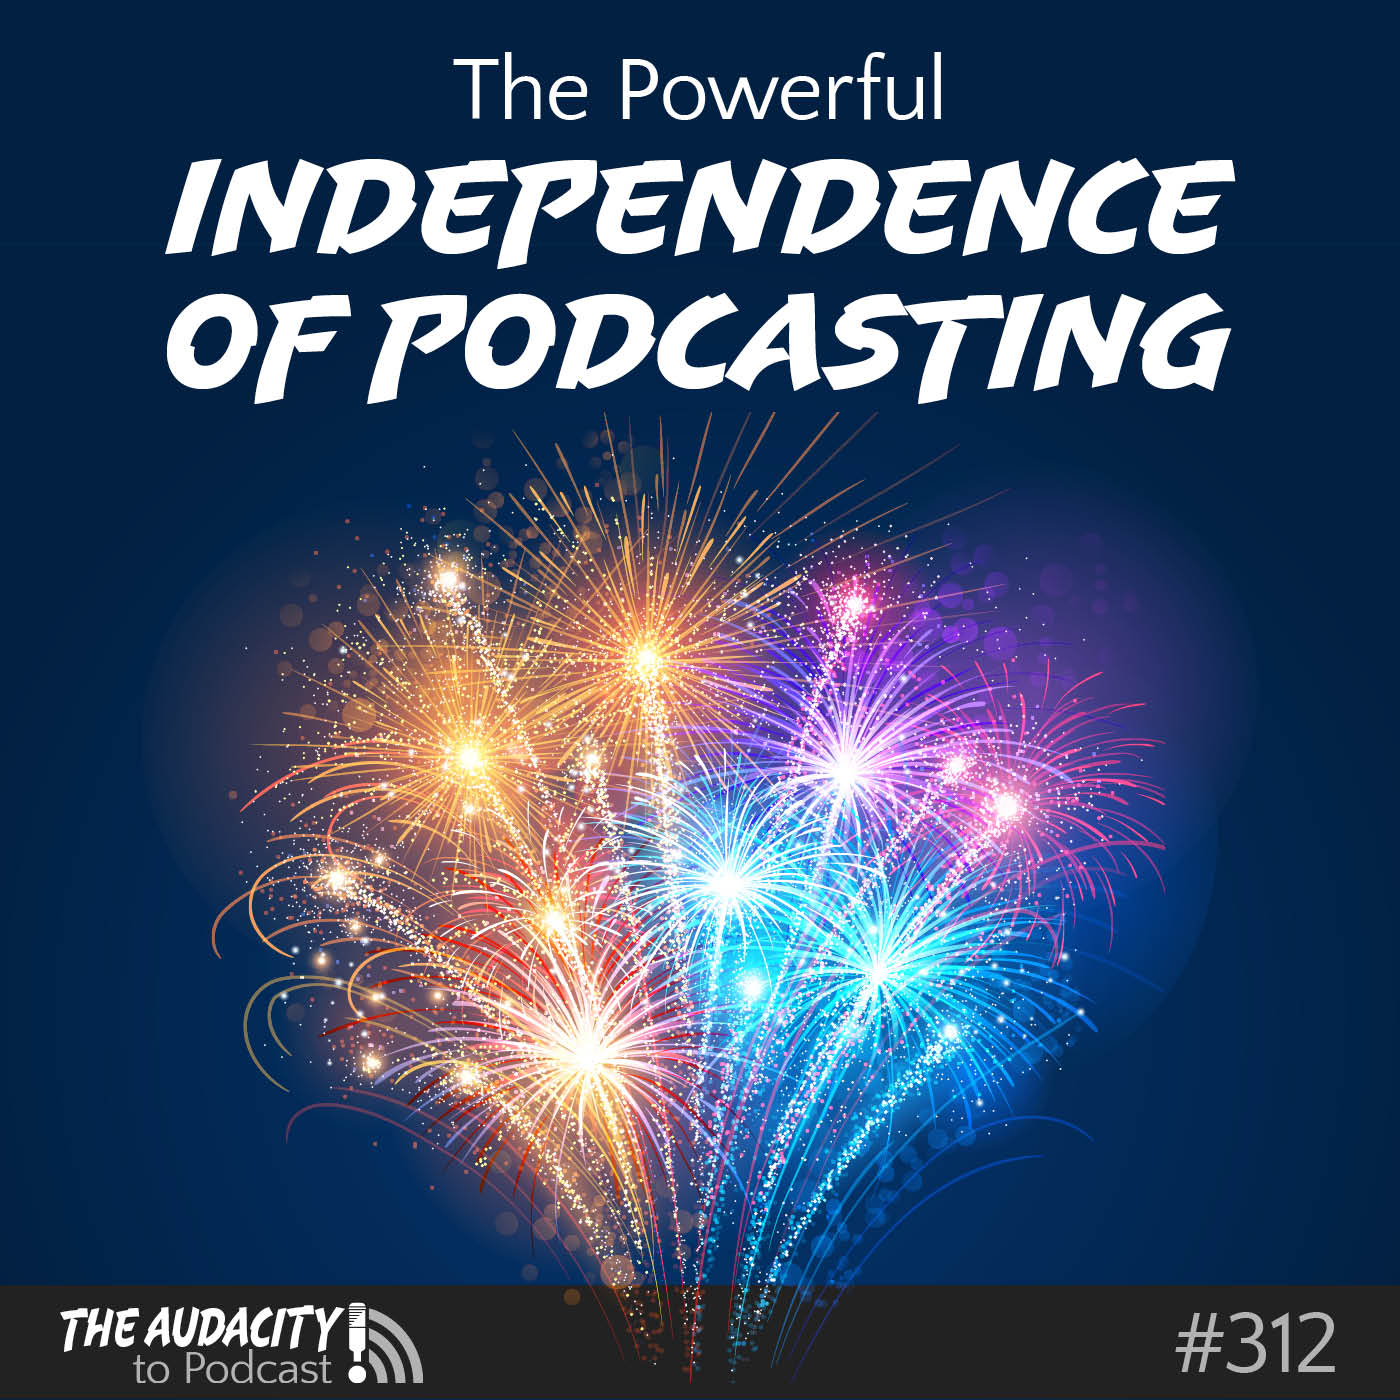 The Powerful Independence of Podcasting